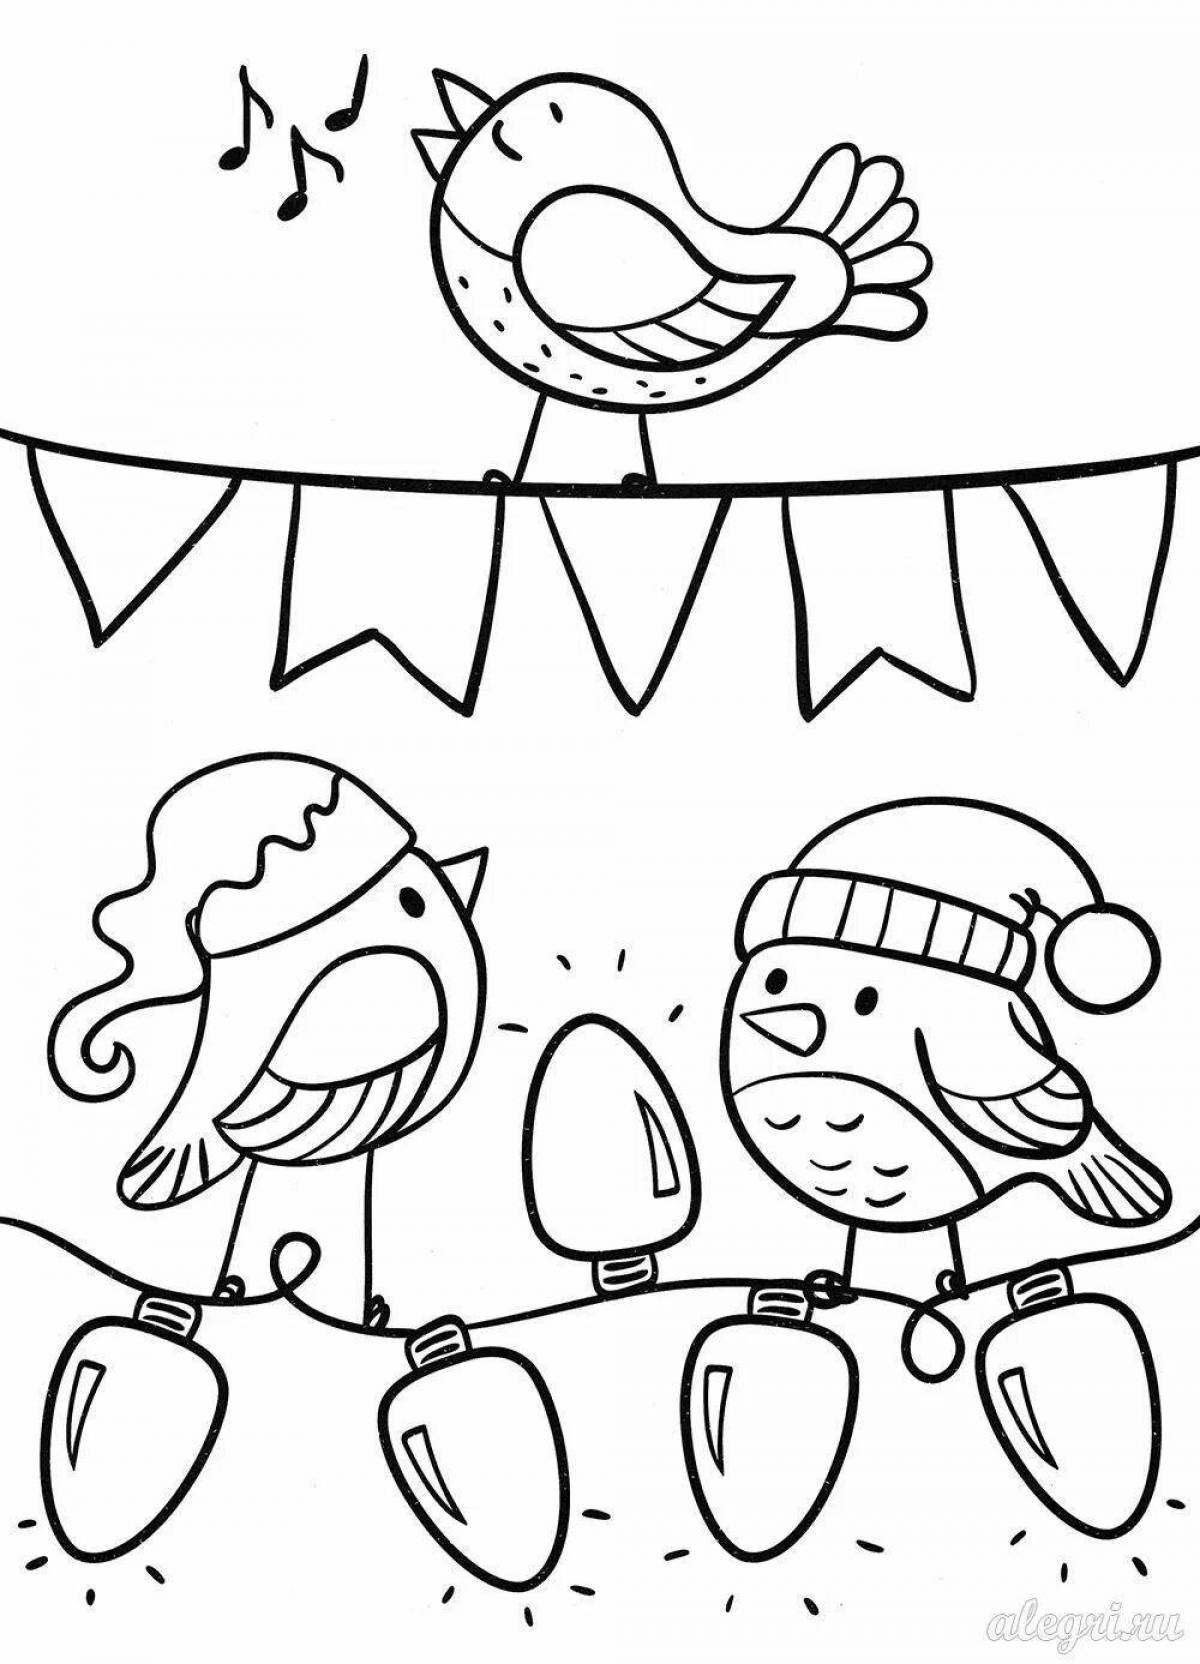 Coloring page magical christmas bird